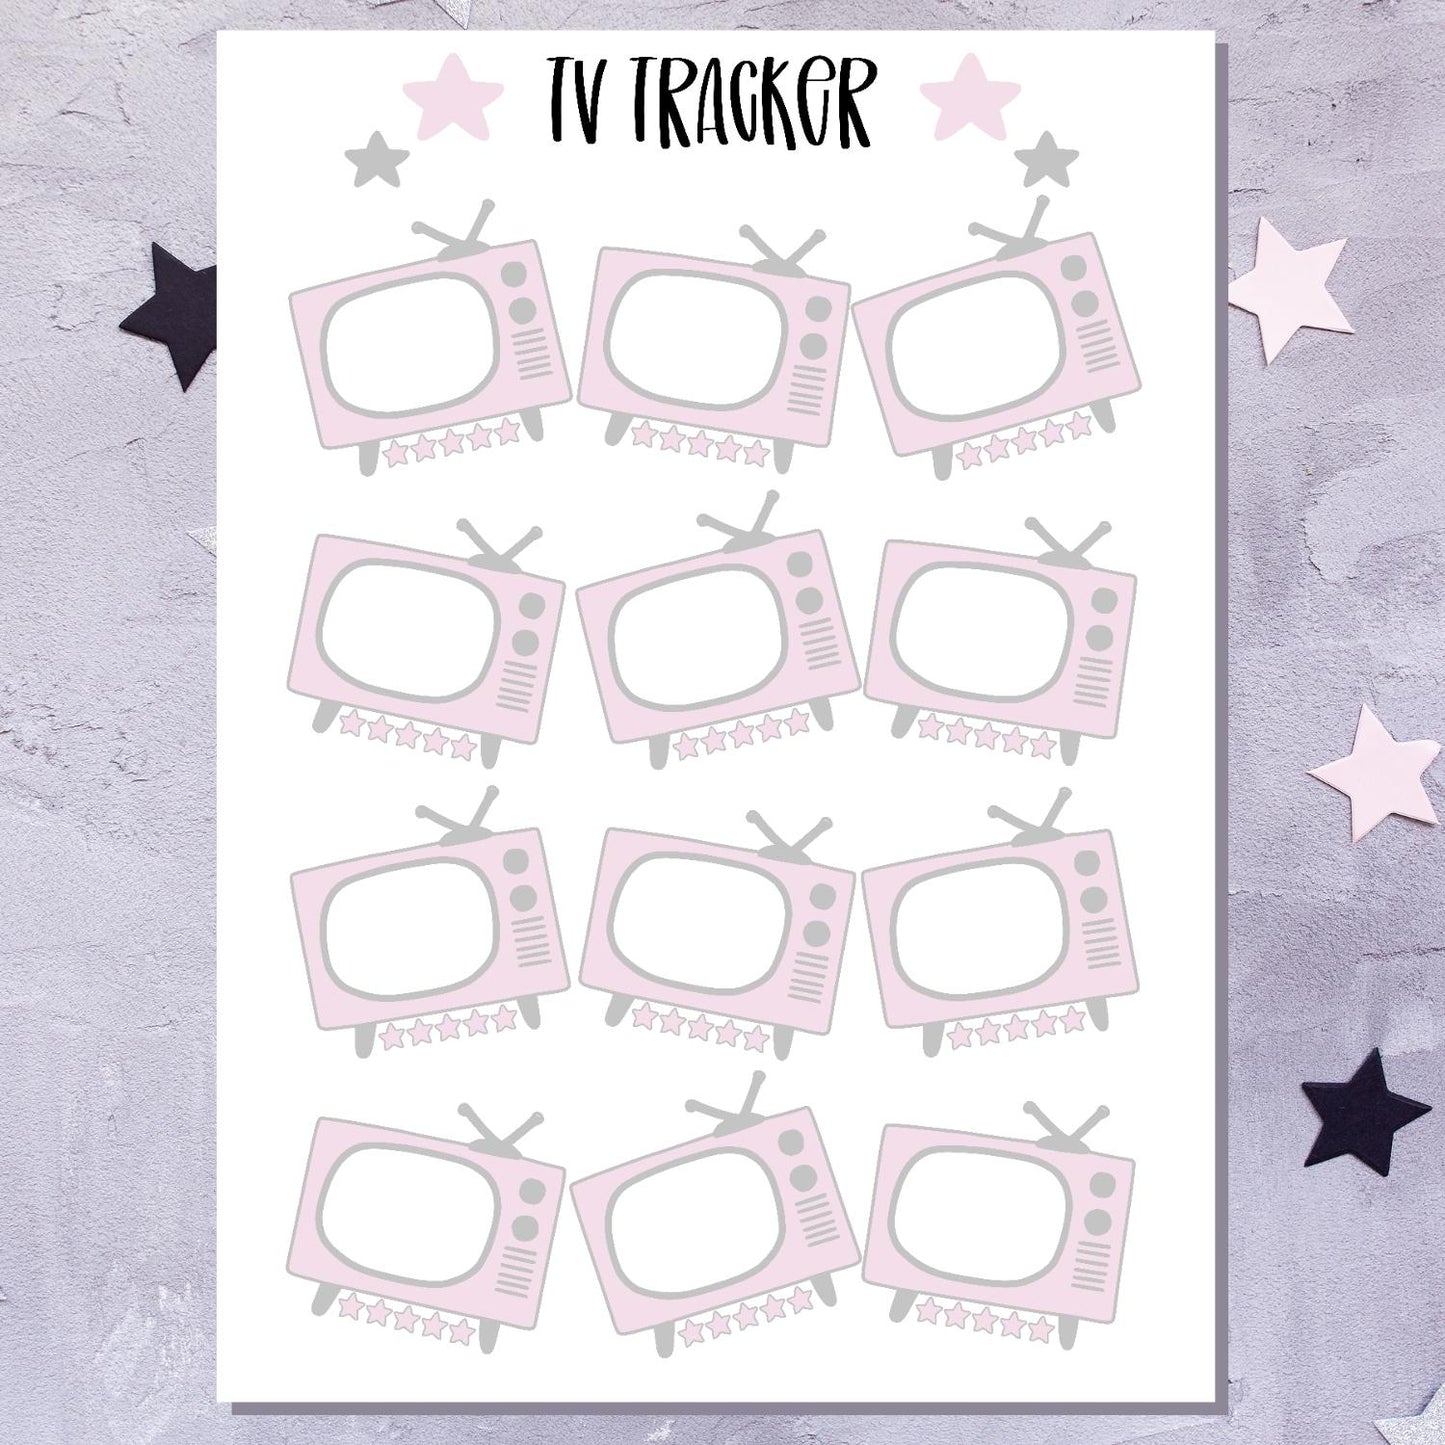 Pink TV Tracker - Full Page Sticker